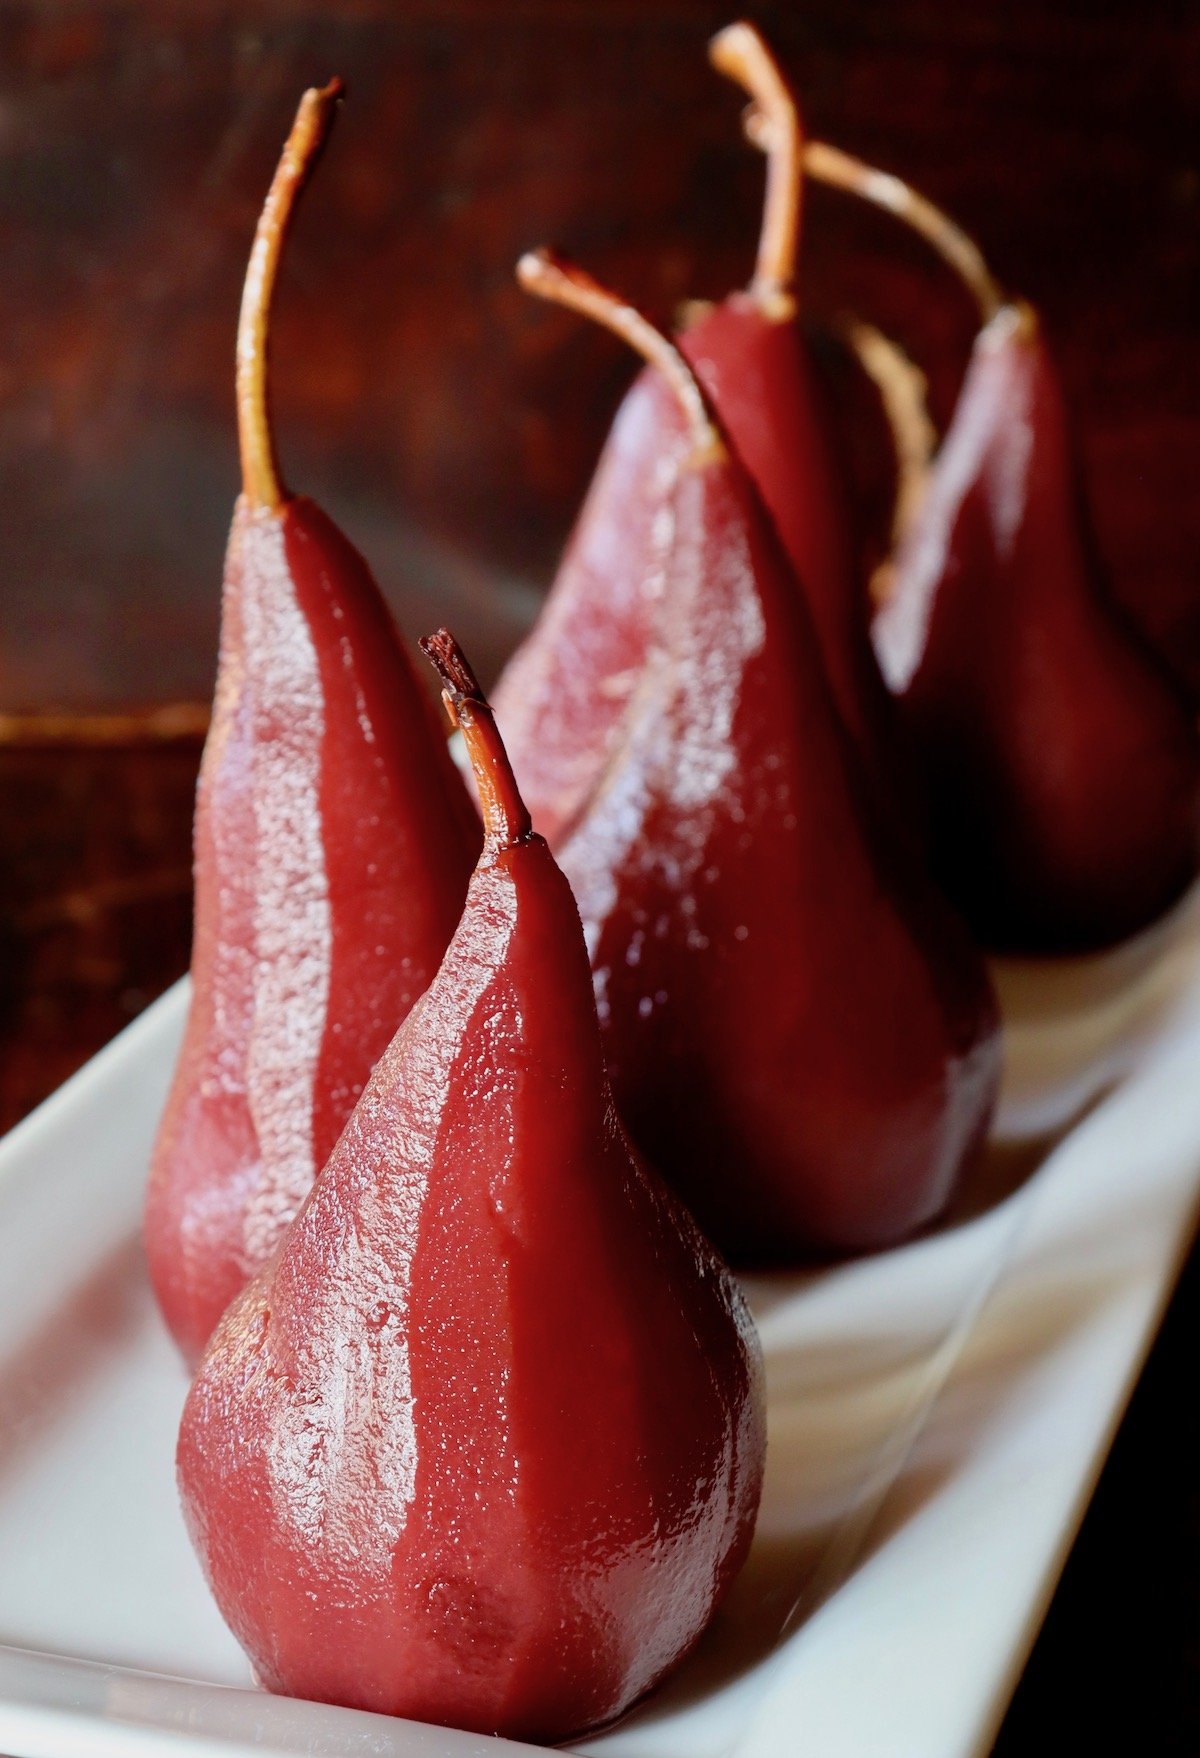 sveral whole port wine poached pears standing up.